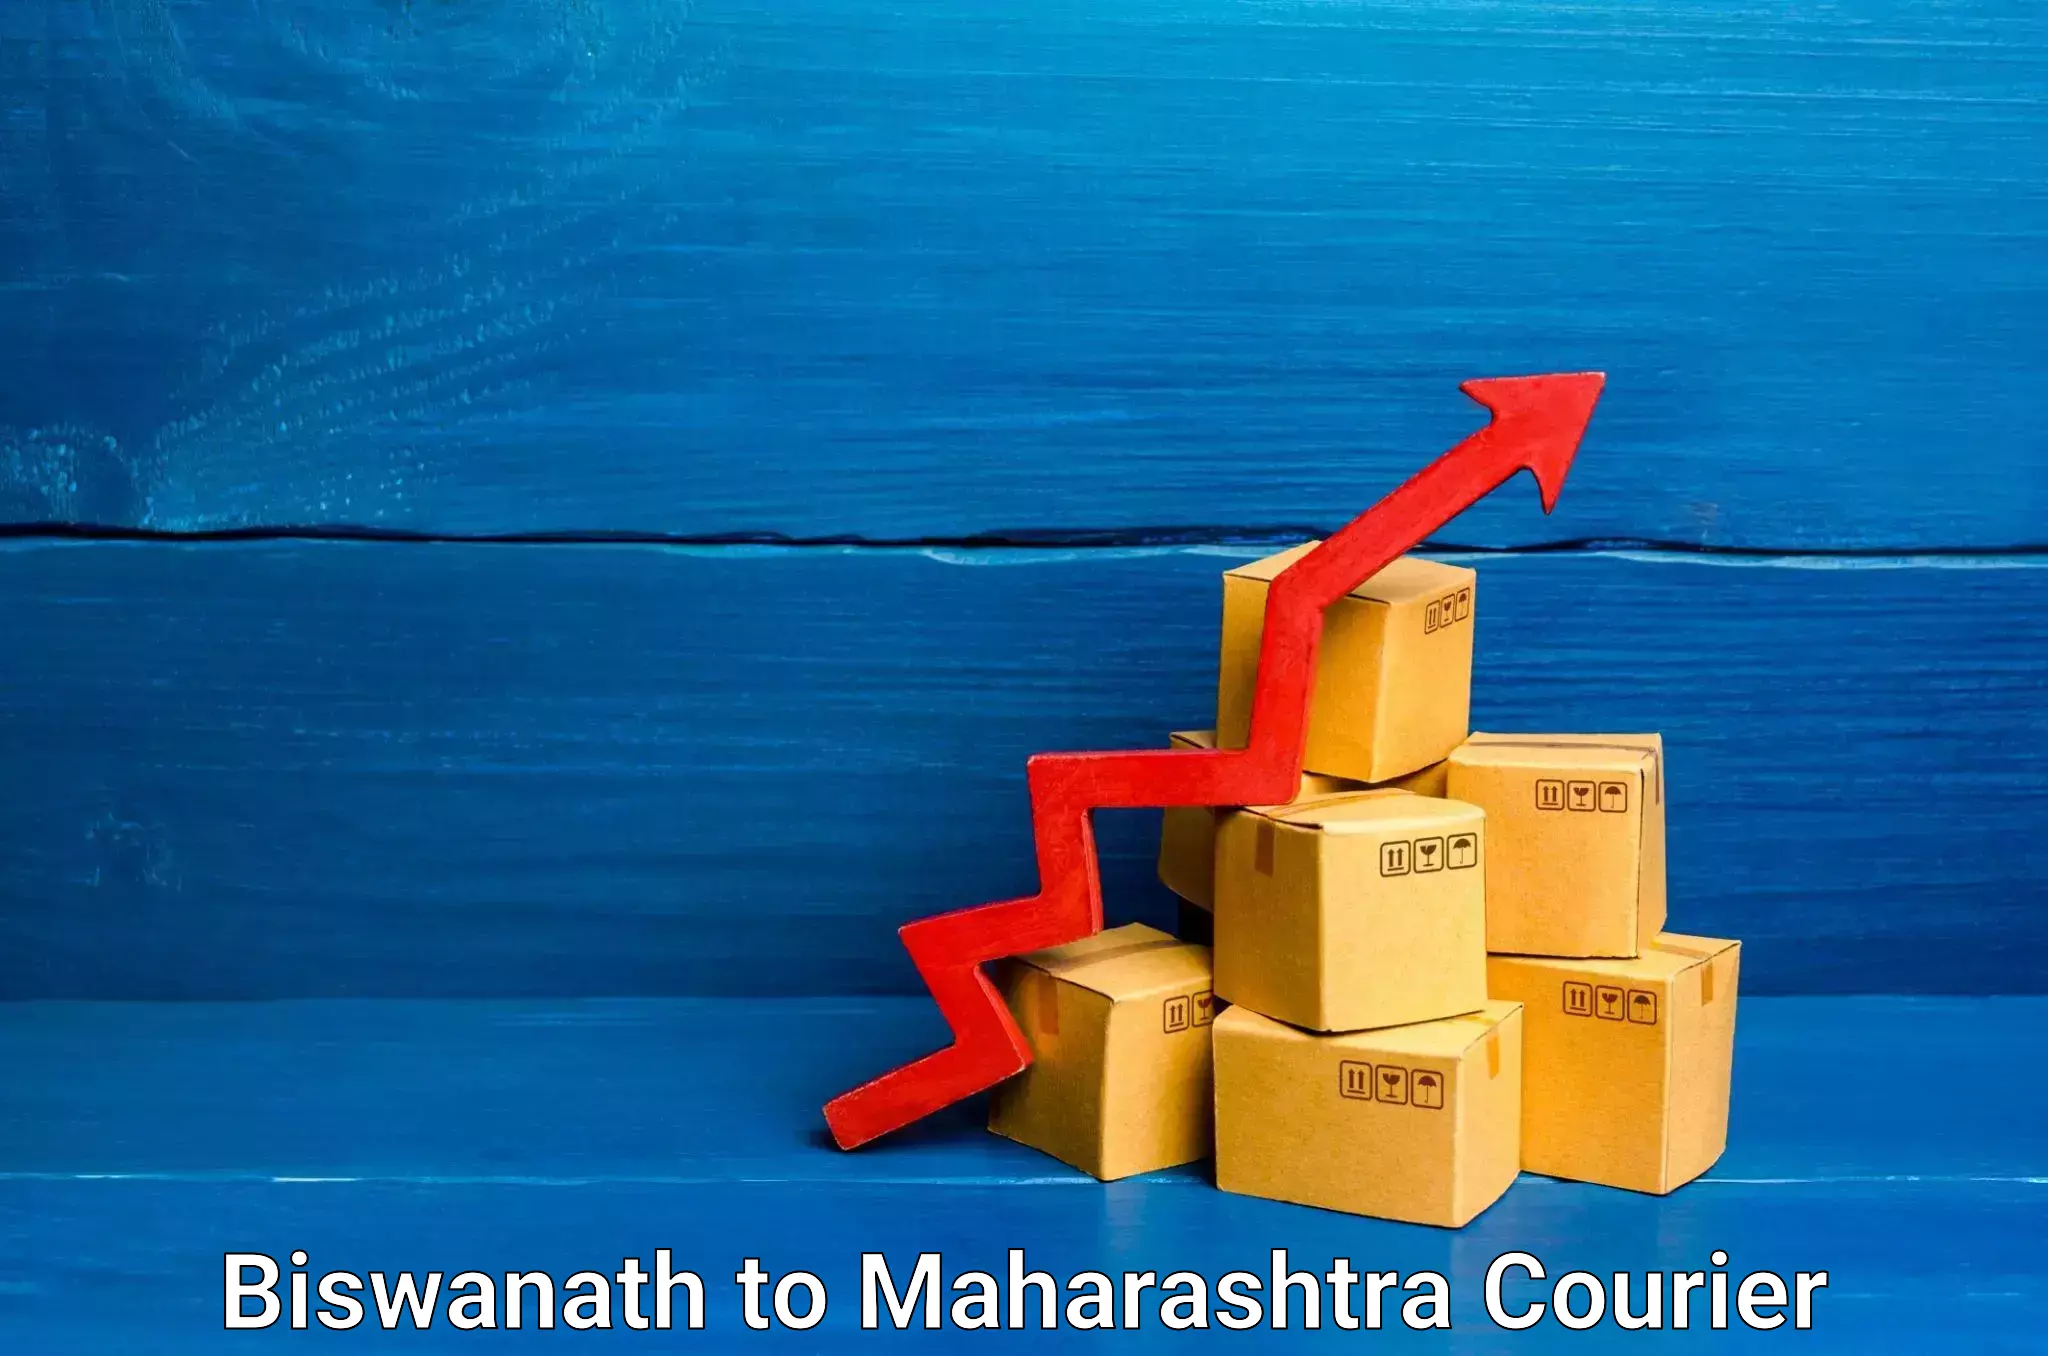 Shipping and handling Biswanath to Solapur